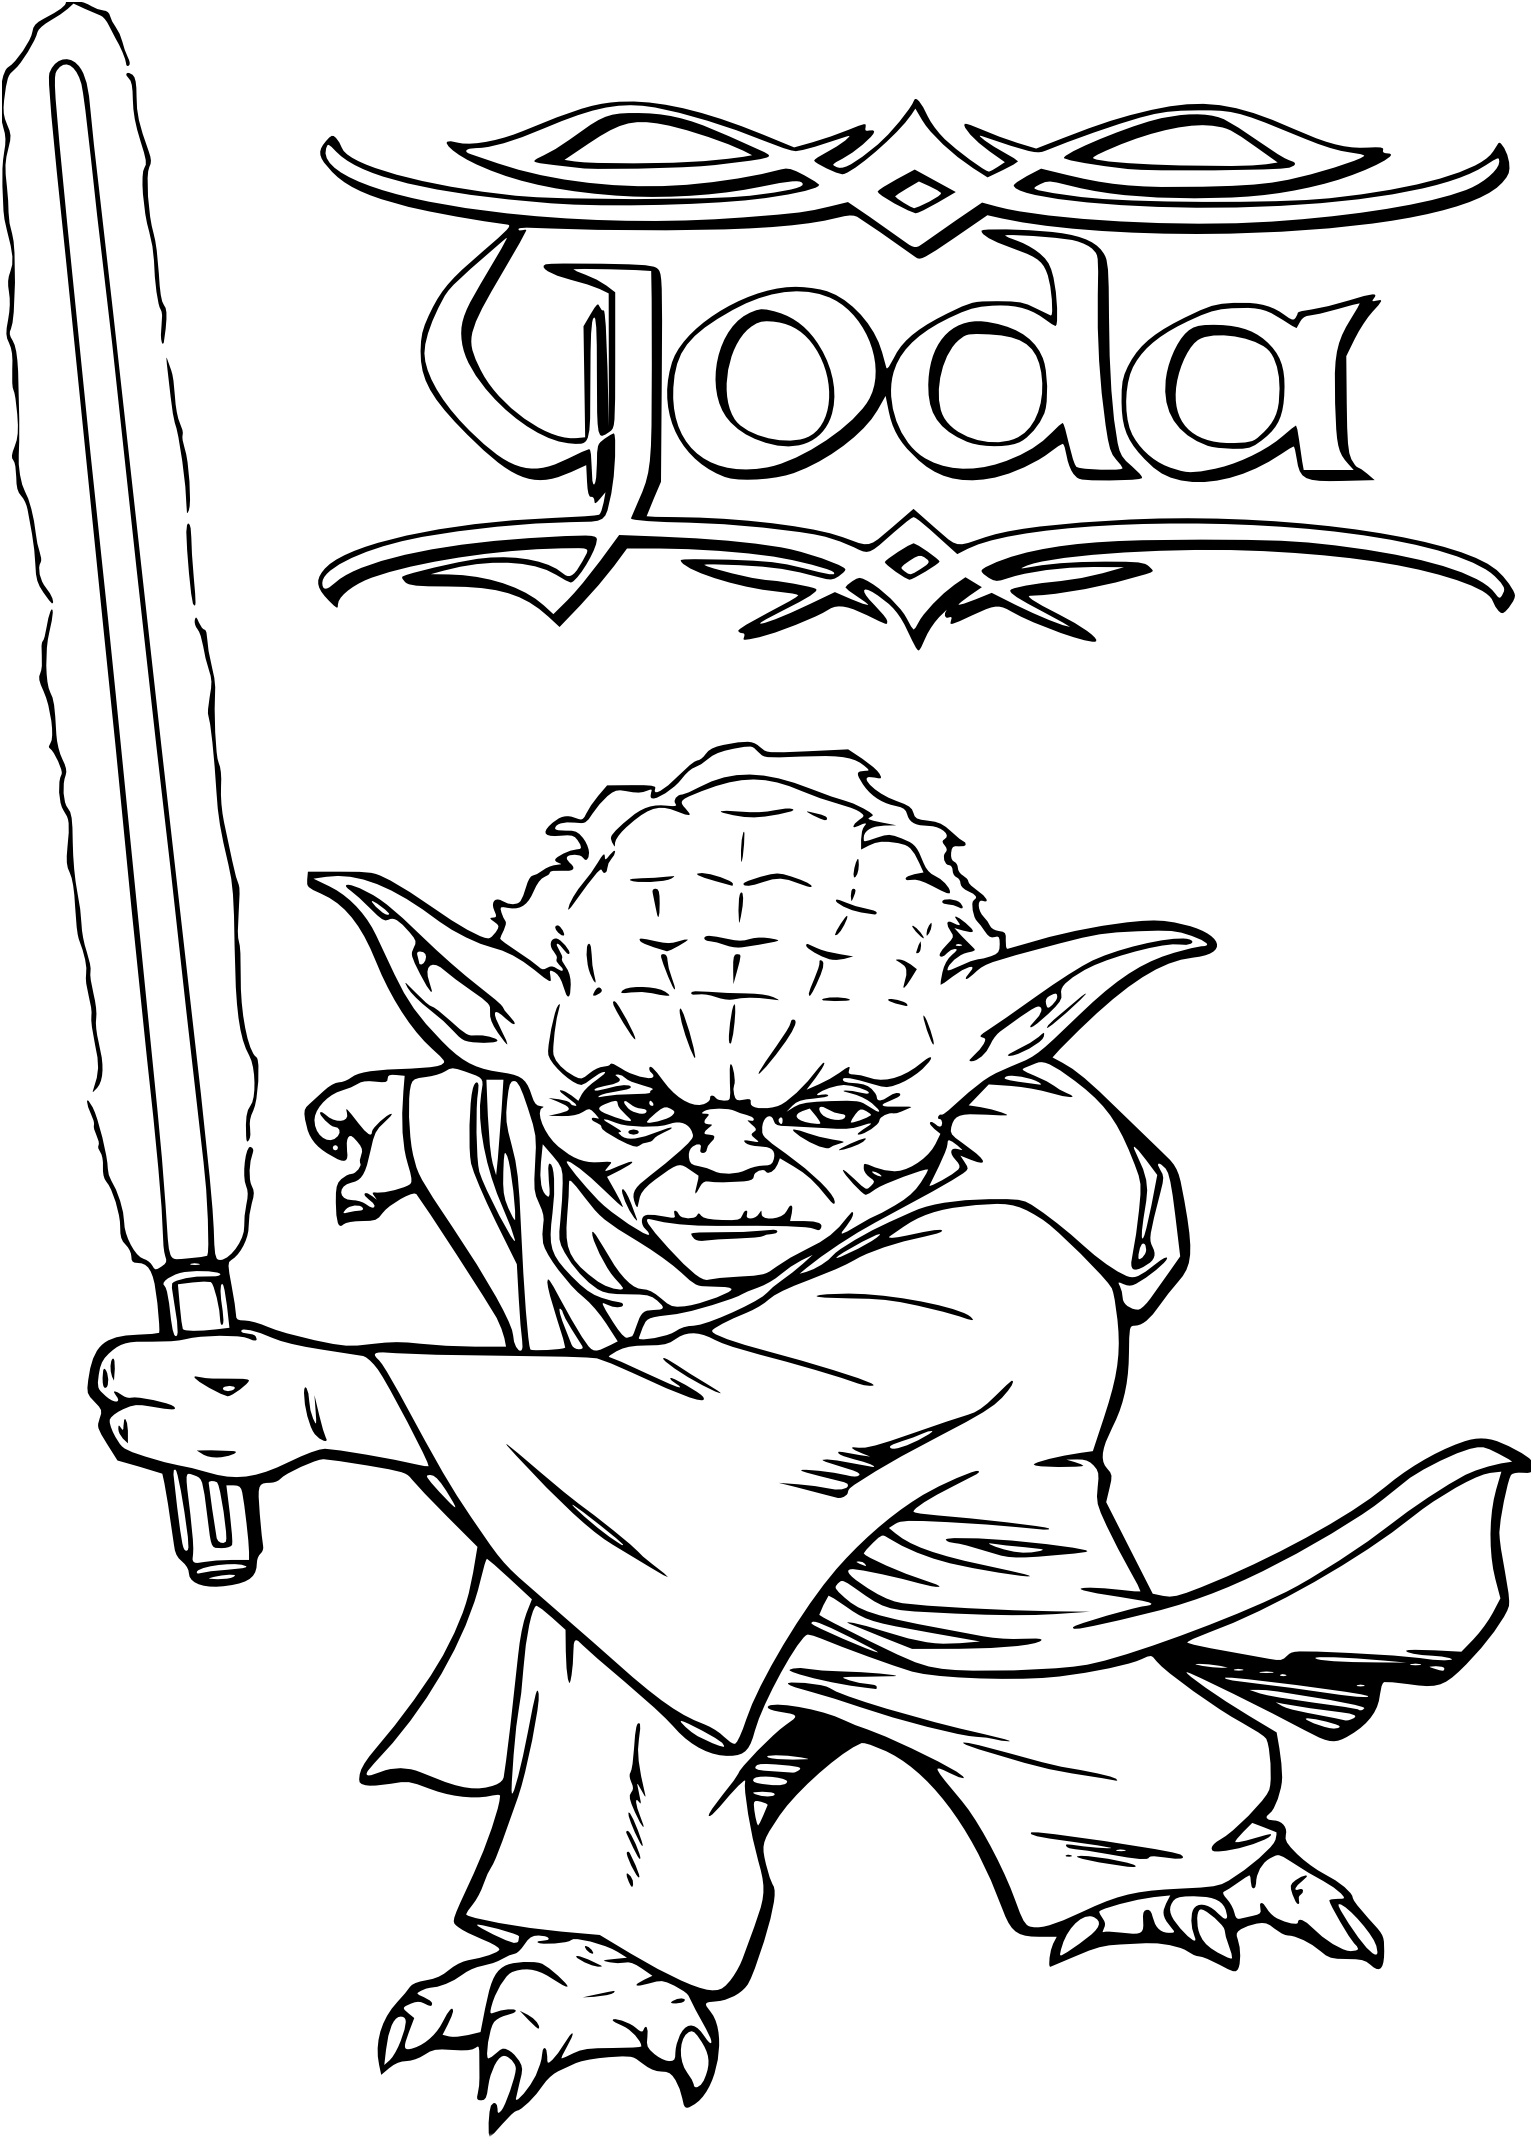 q=yoda with lightsaber